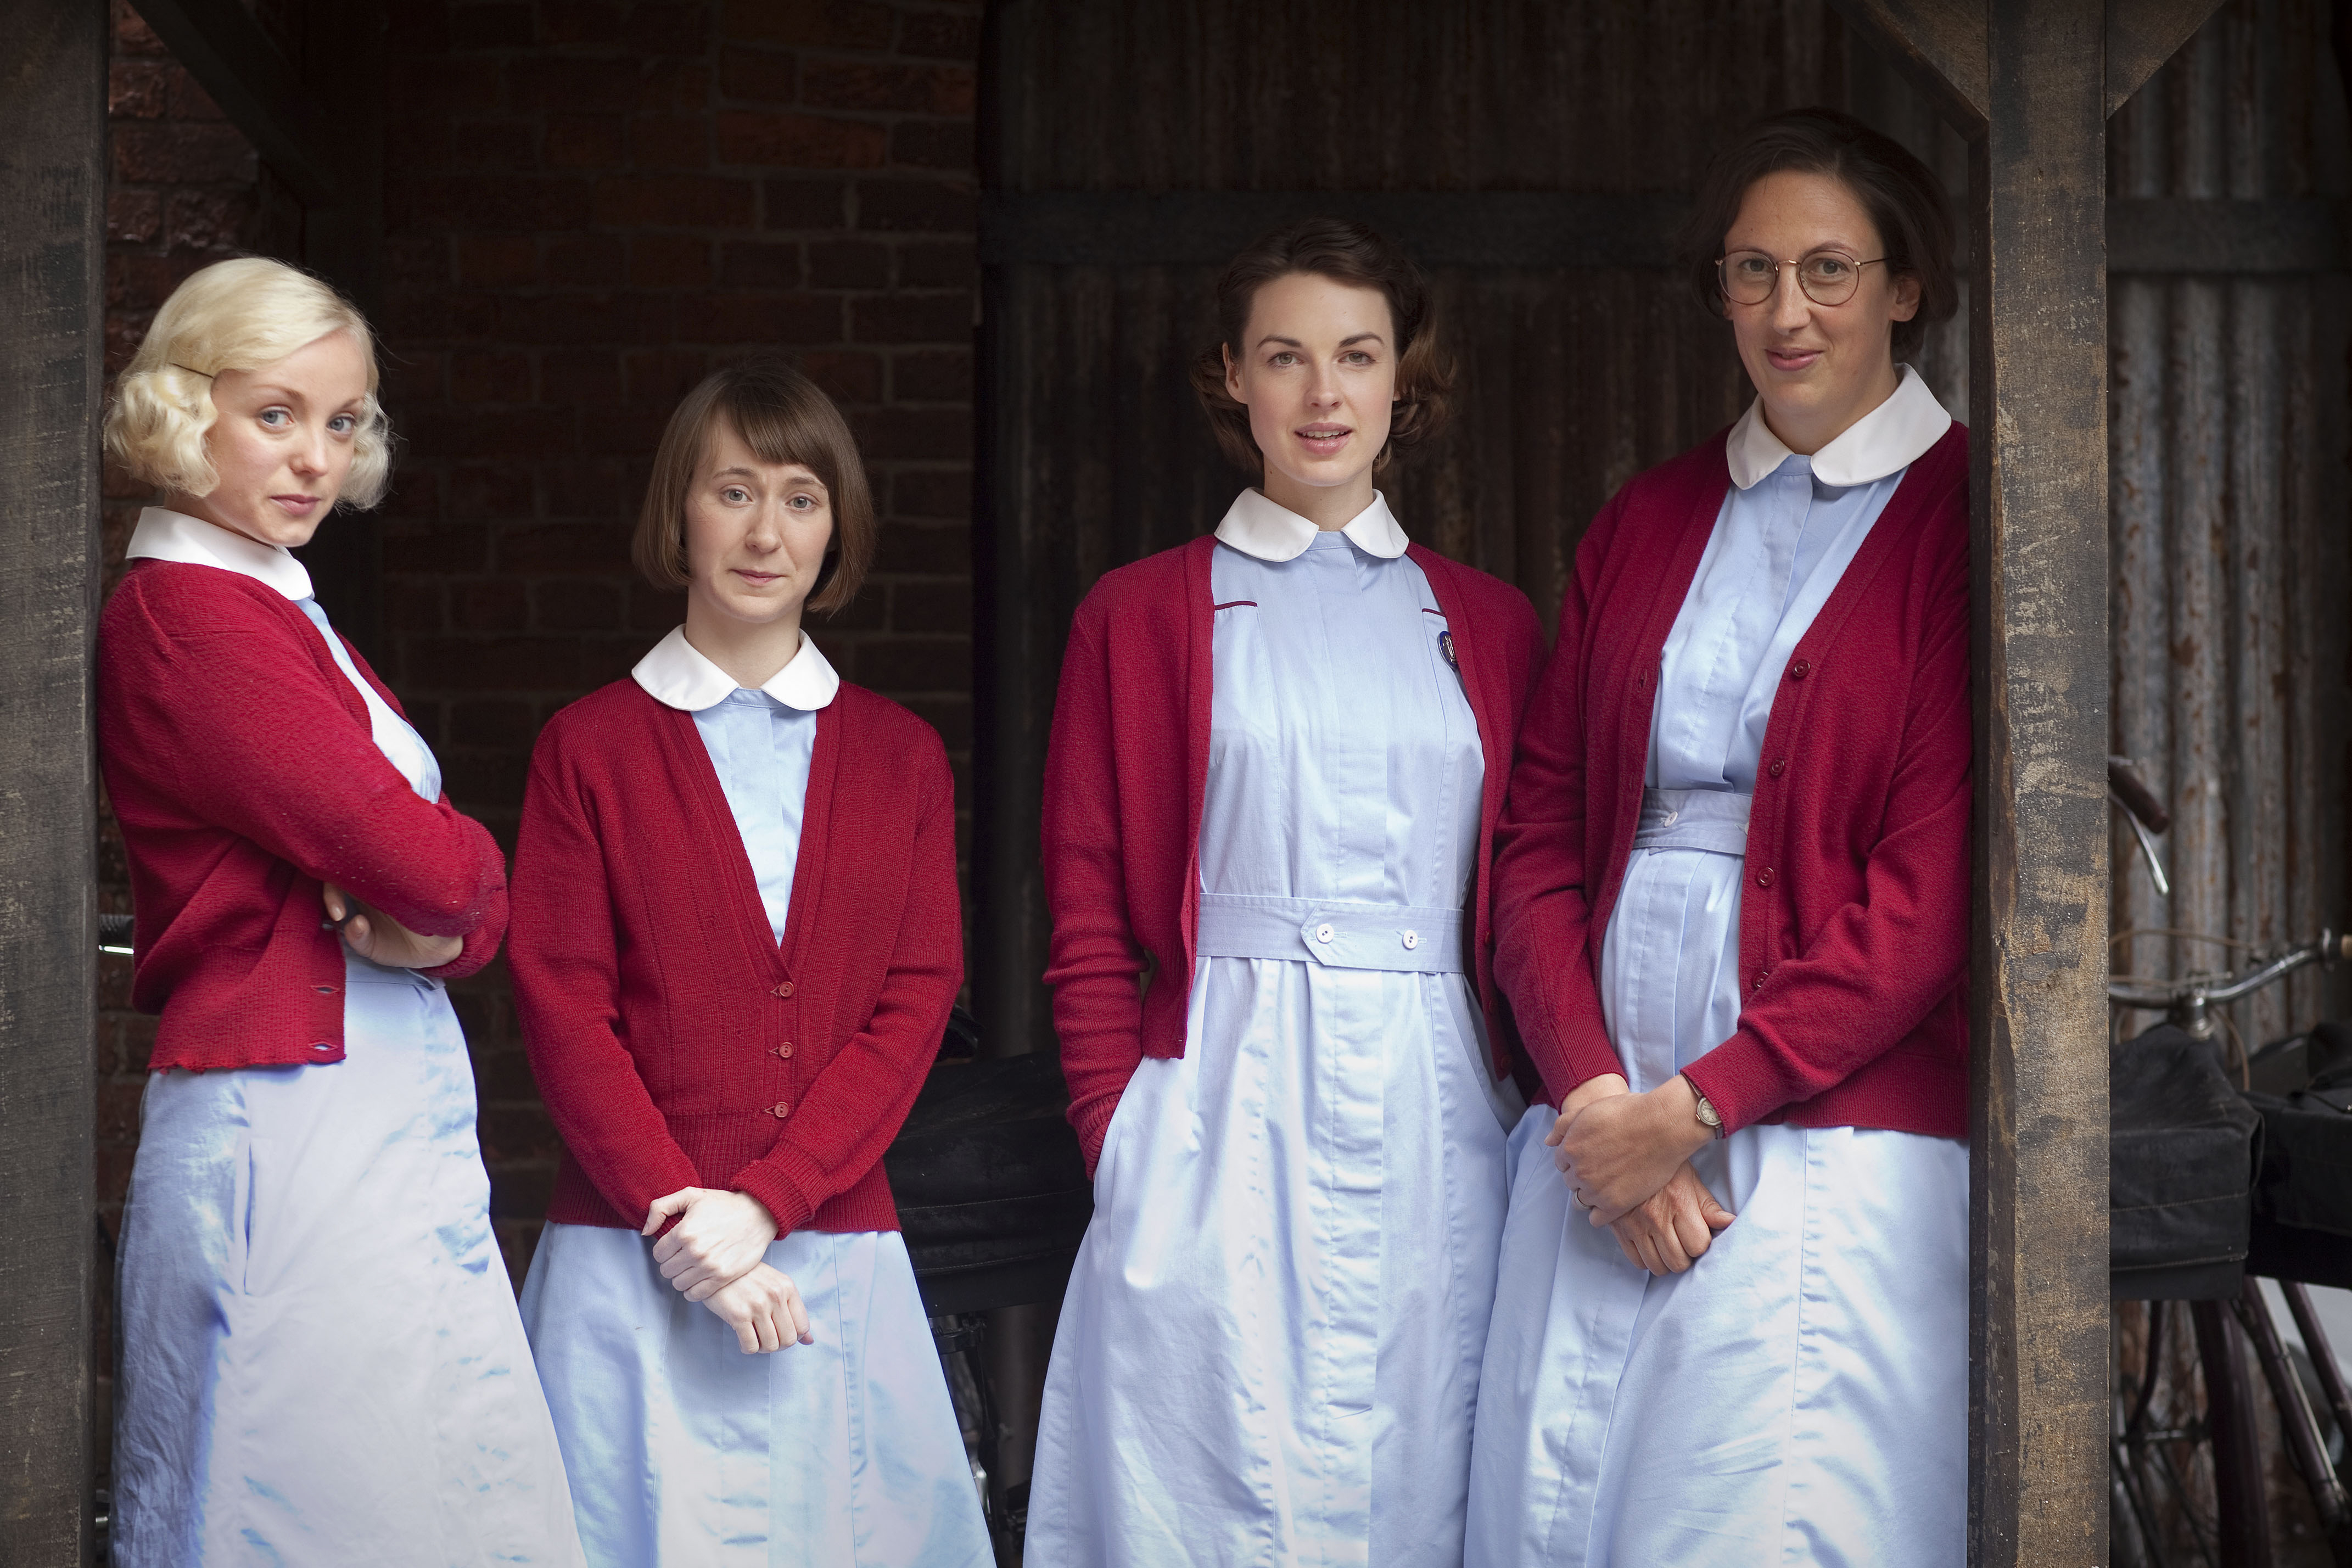 The ladies of "Call the Midwife" (Photo: Courtesy of Laurence Cendrowicz/© Neal Street Productions)